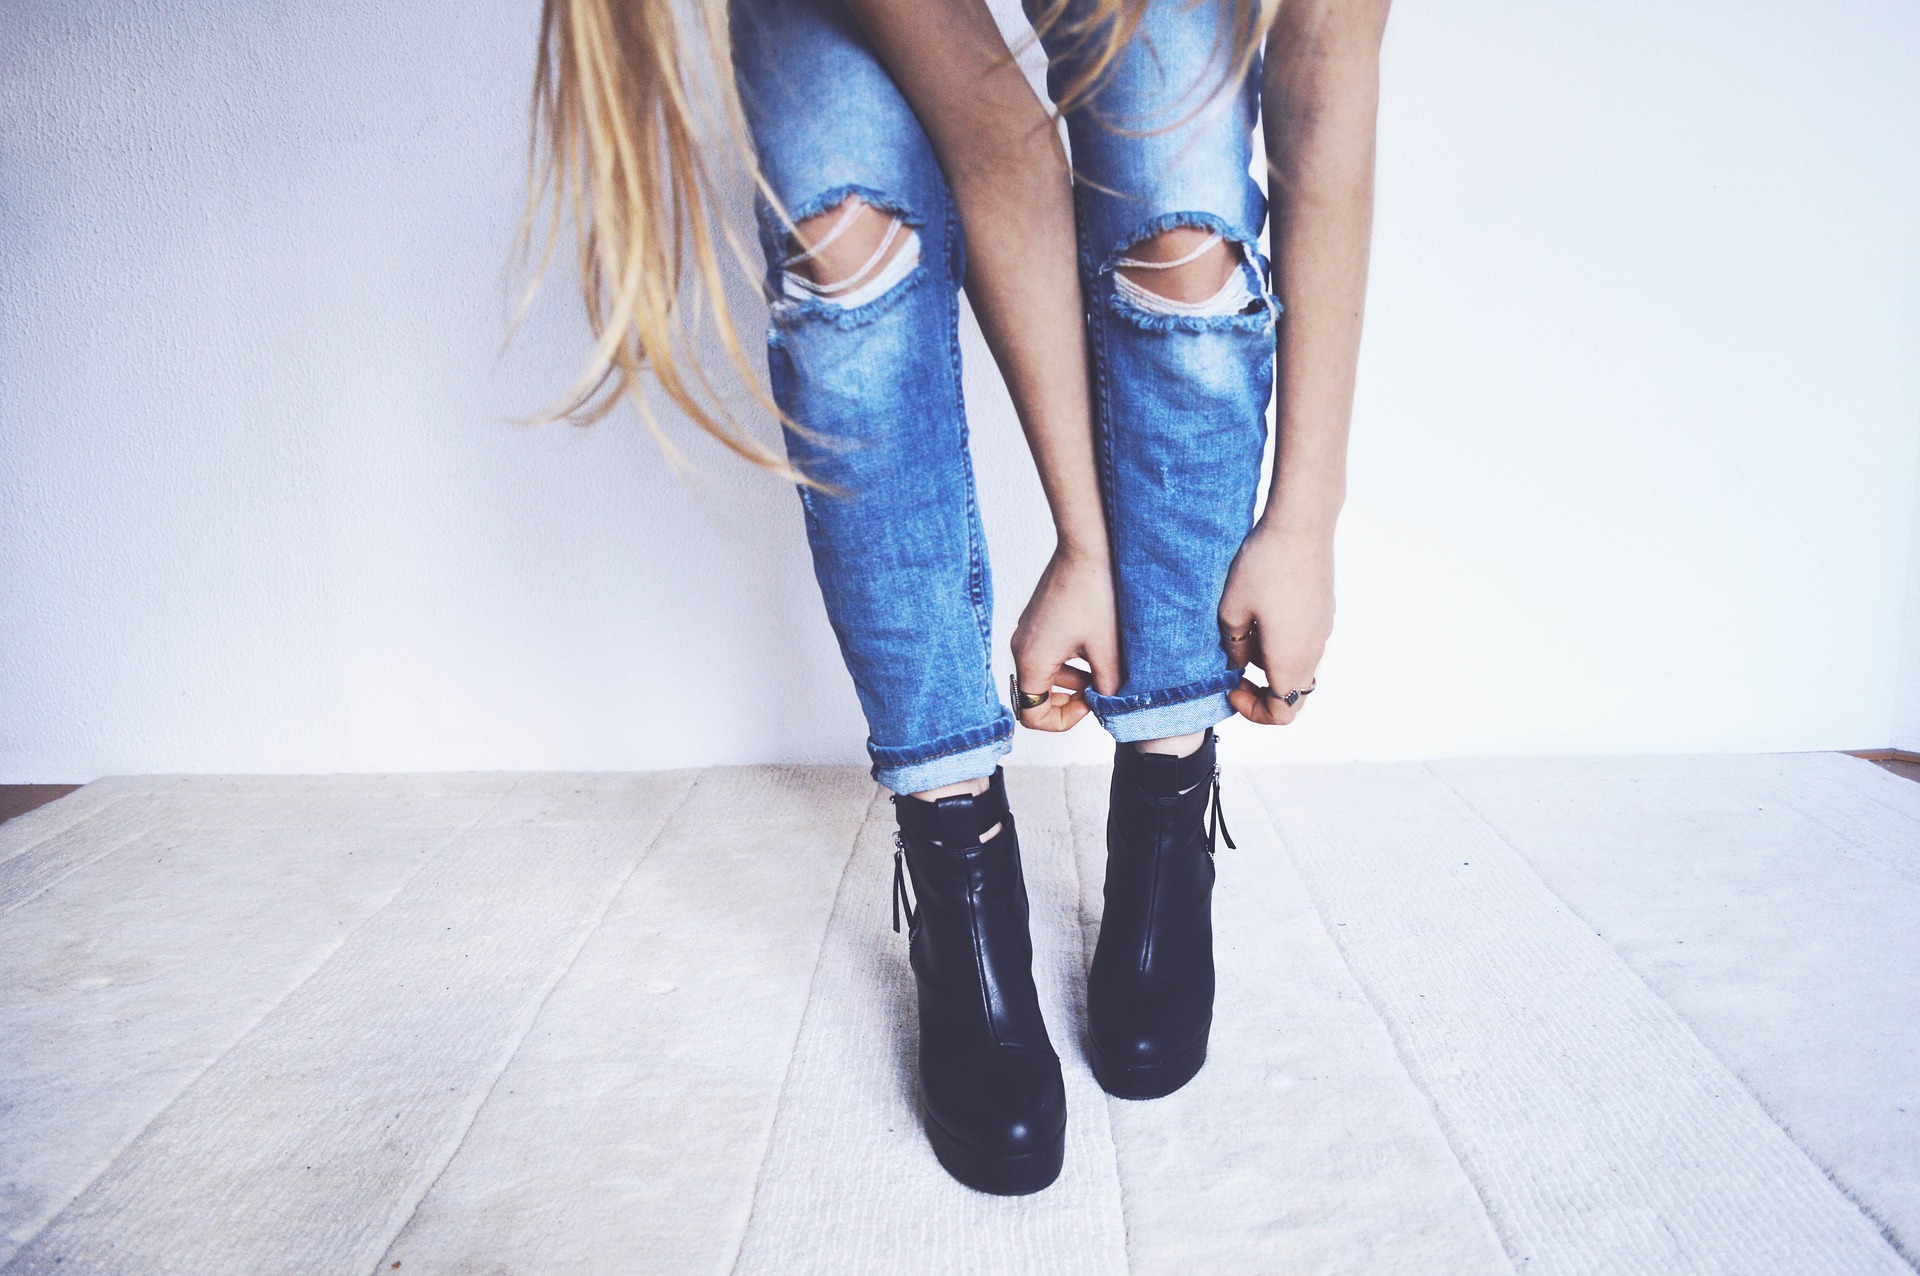 Woman wearing jeans and boots